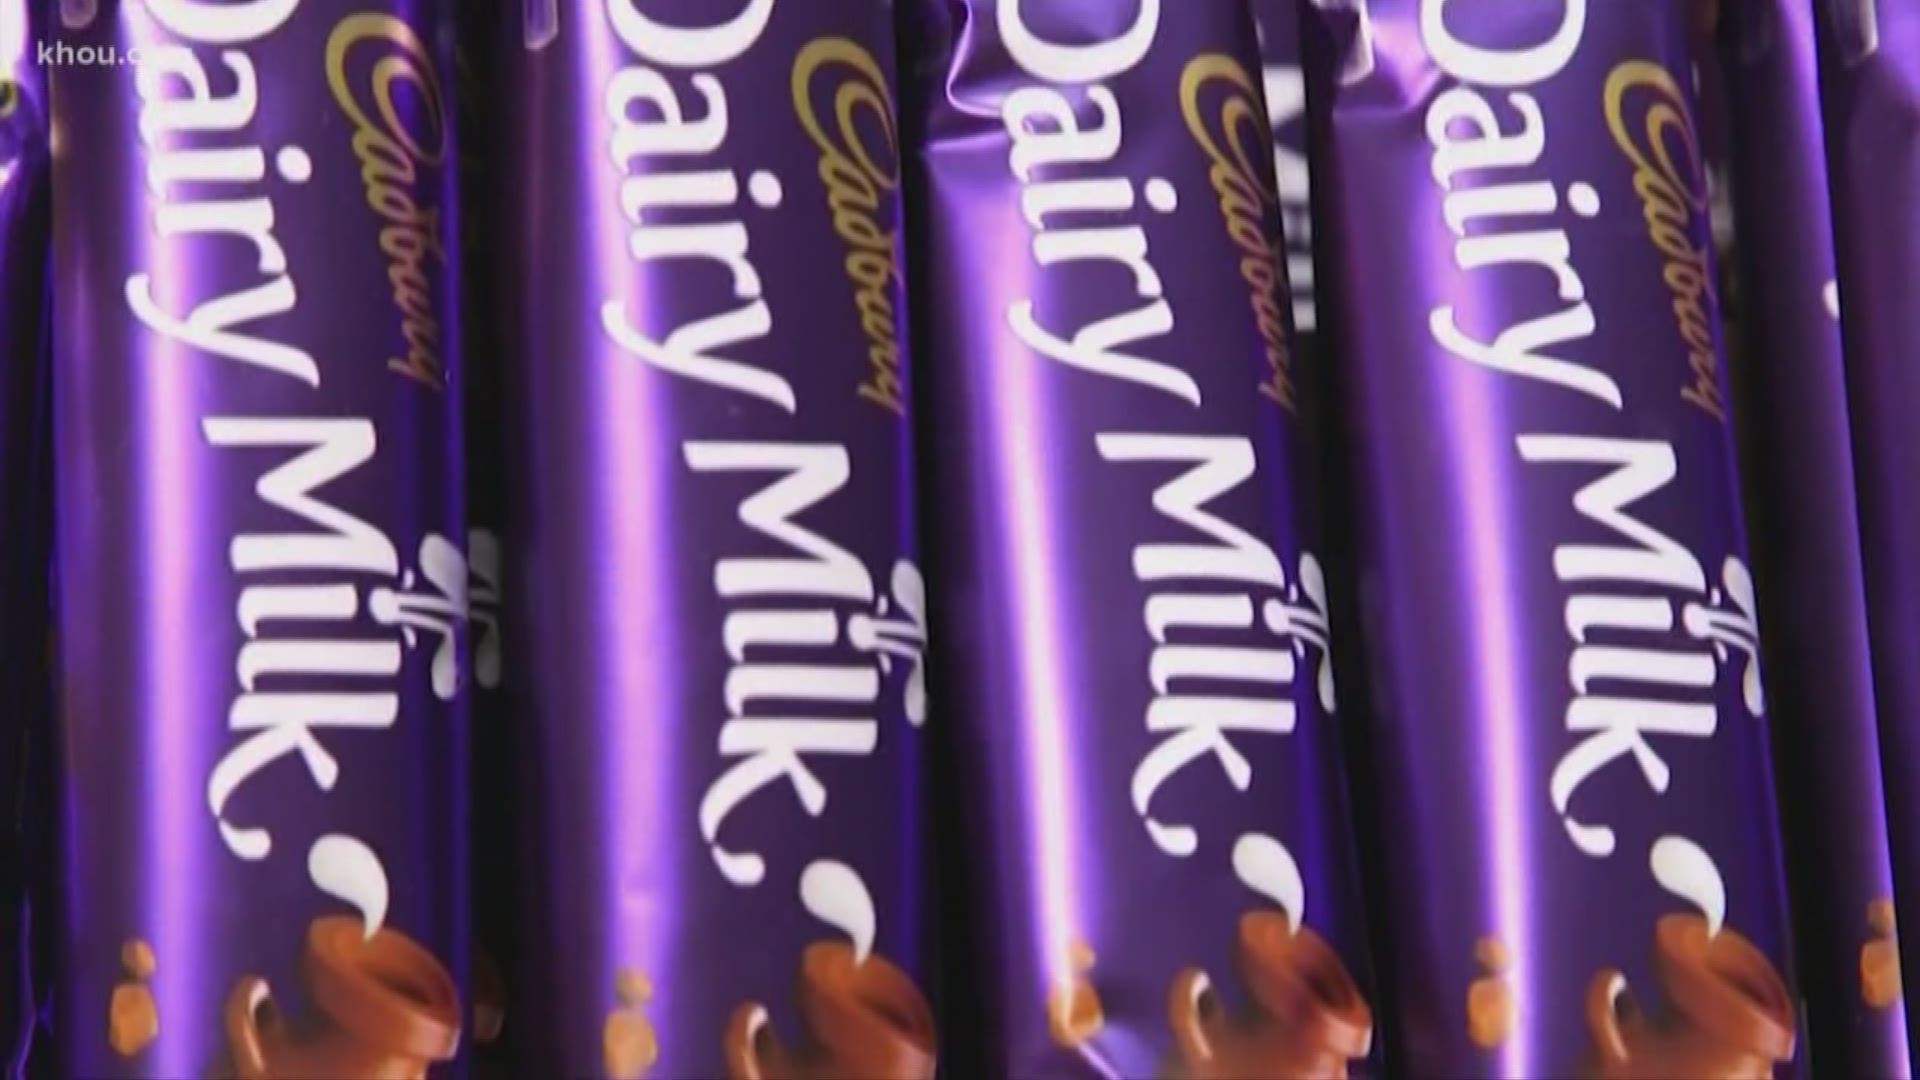 Want a part-time job where you get to eat chocolate? Look to Cadbury.